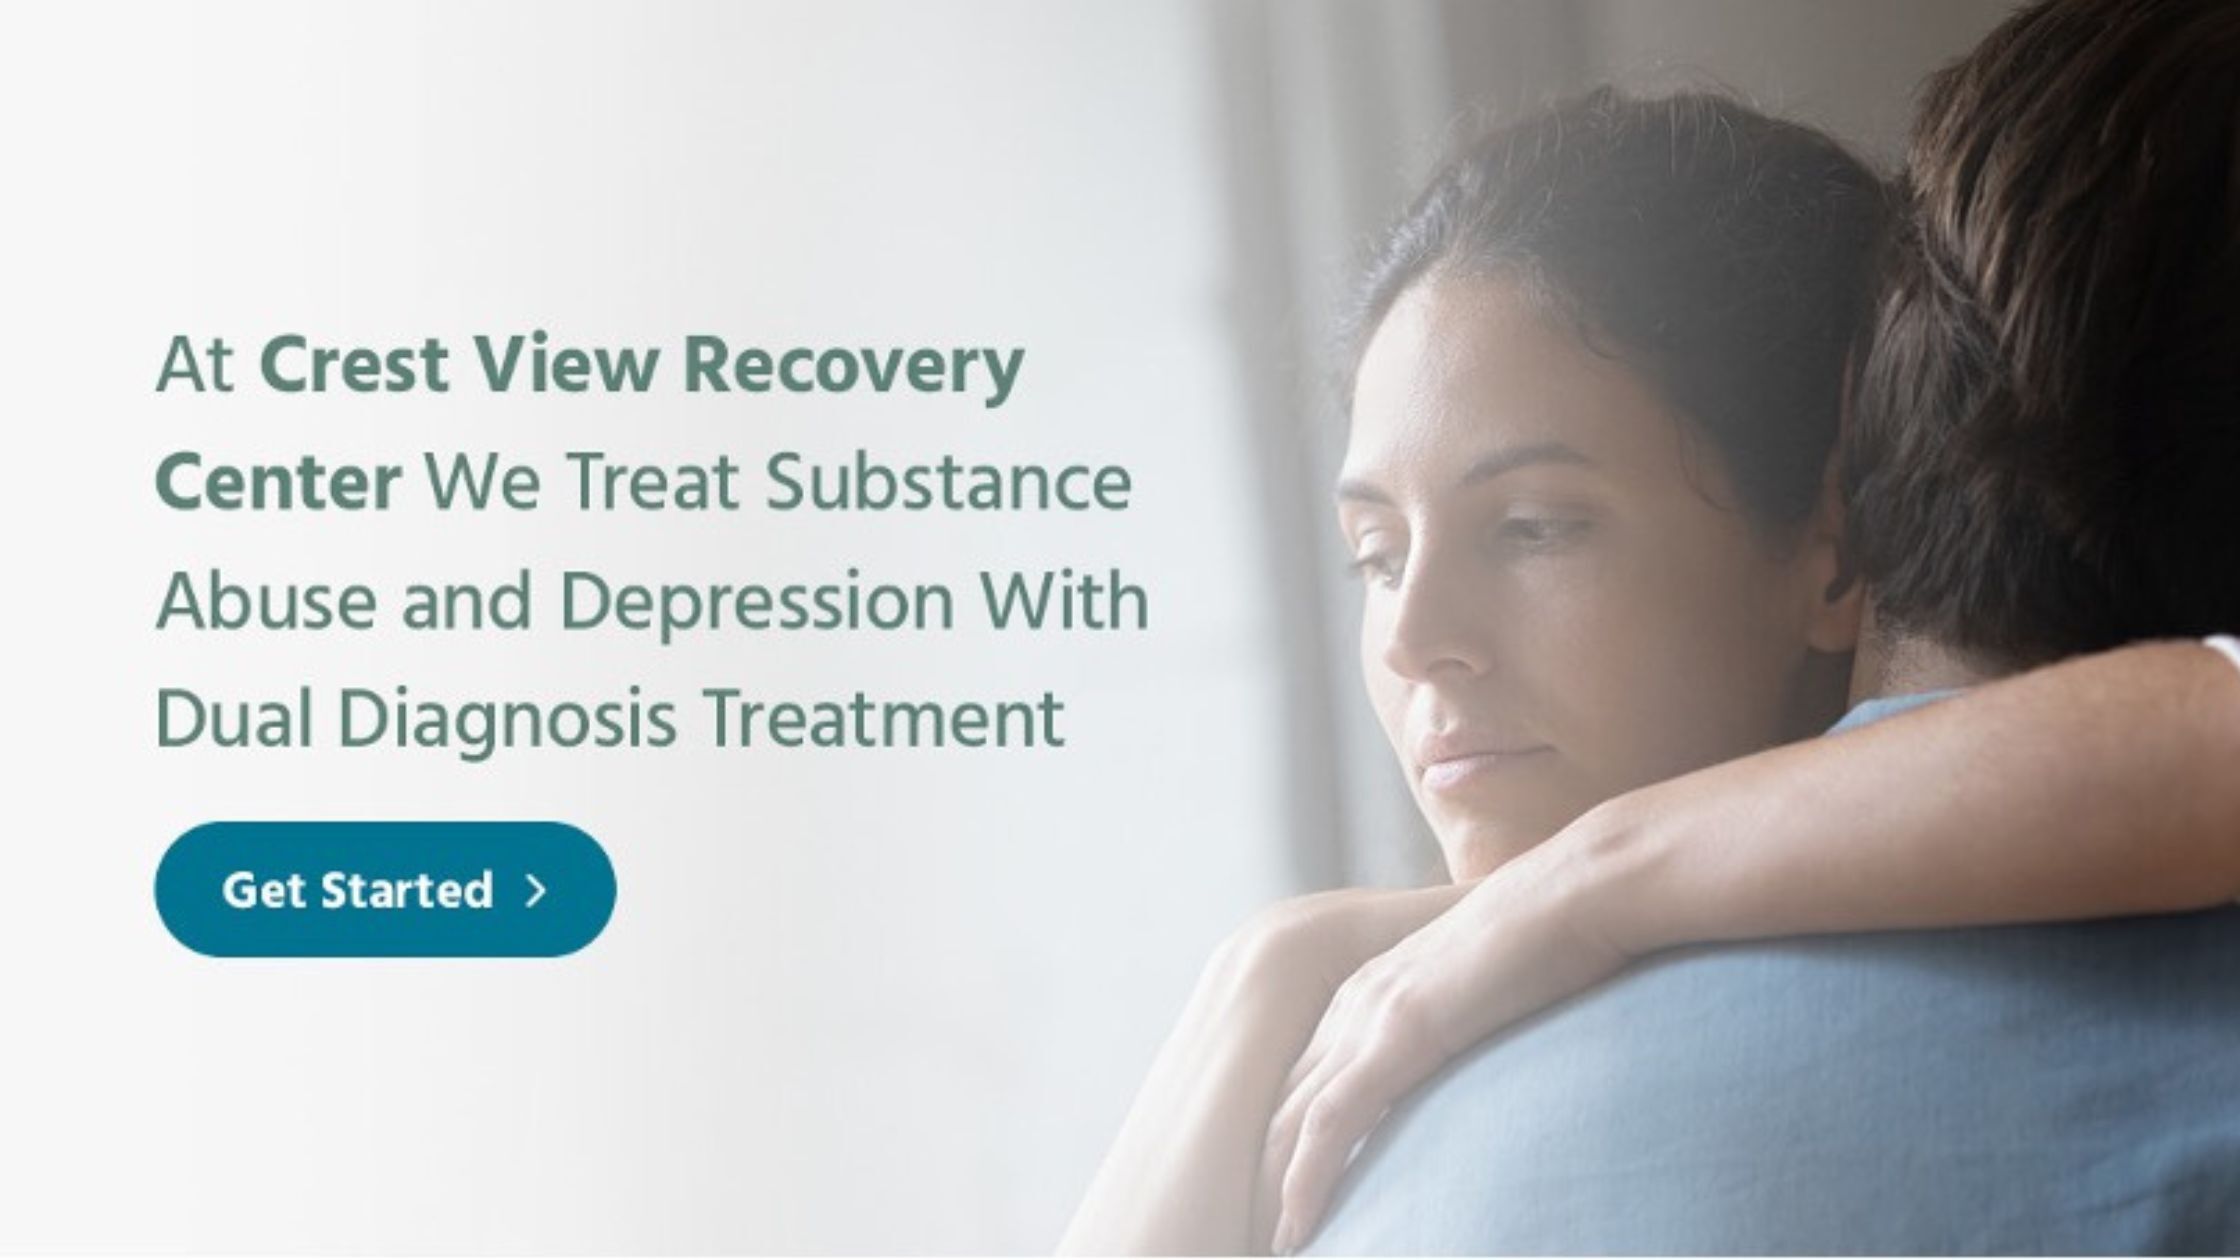 We treat substance abuse and depression with dual diagnosis treatment. Get started